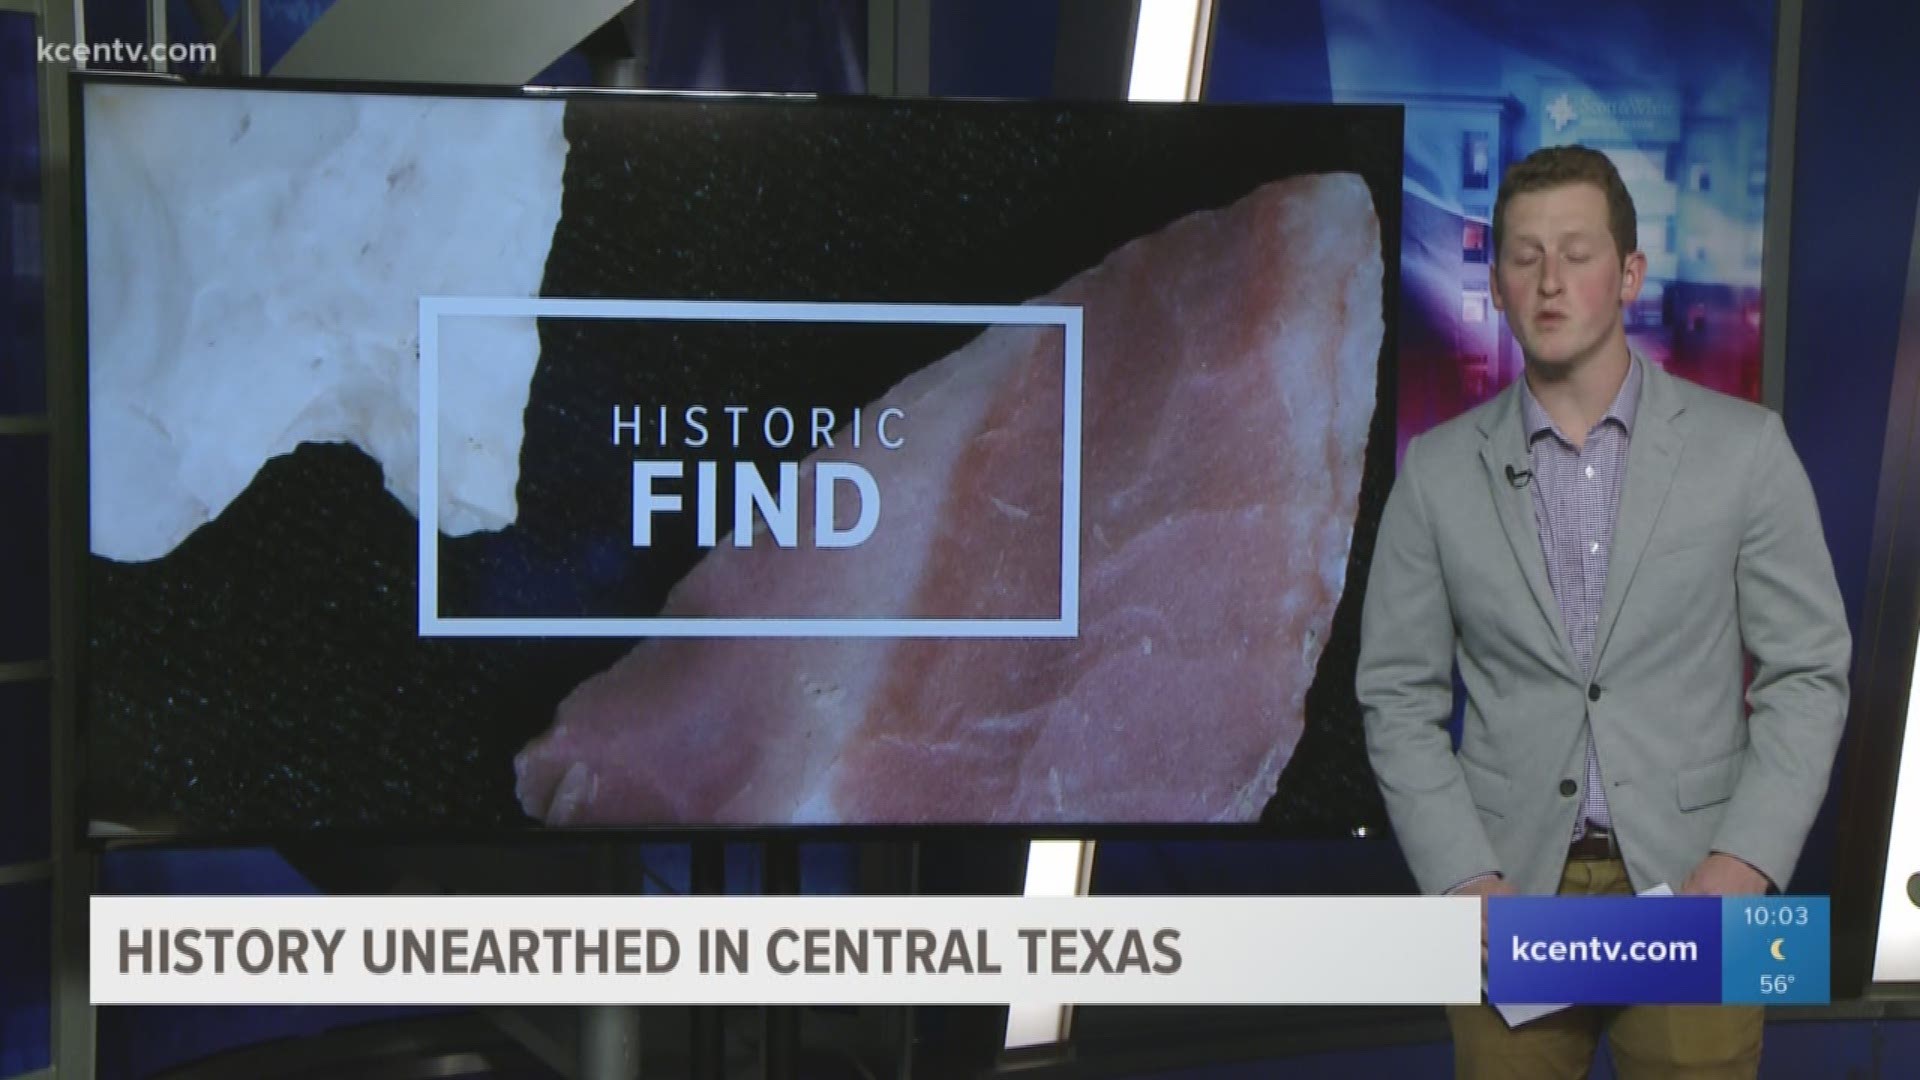 History unearthed in Central Texas